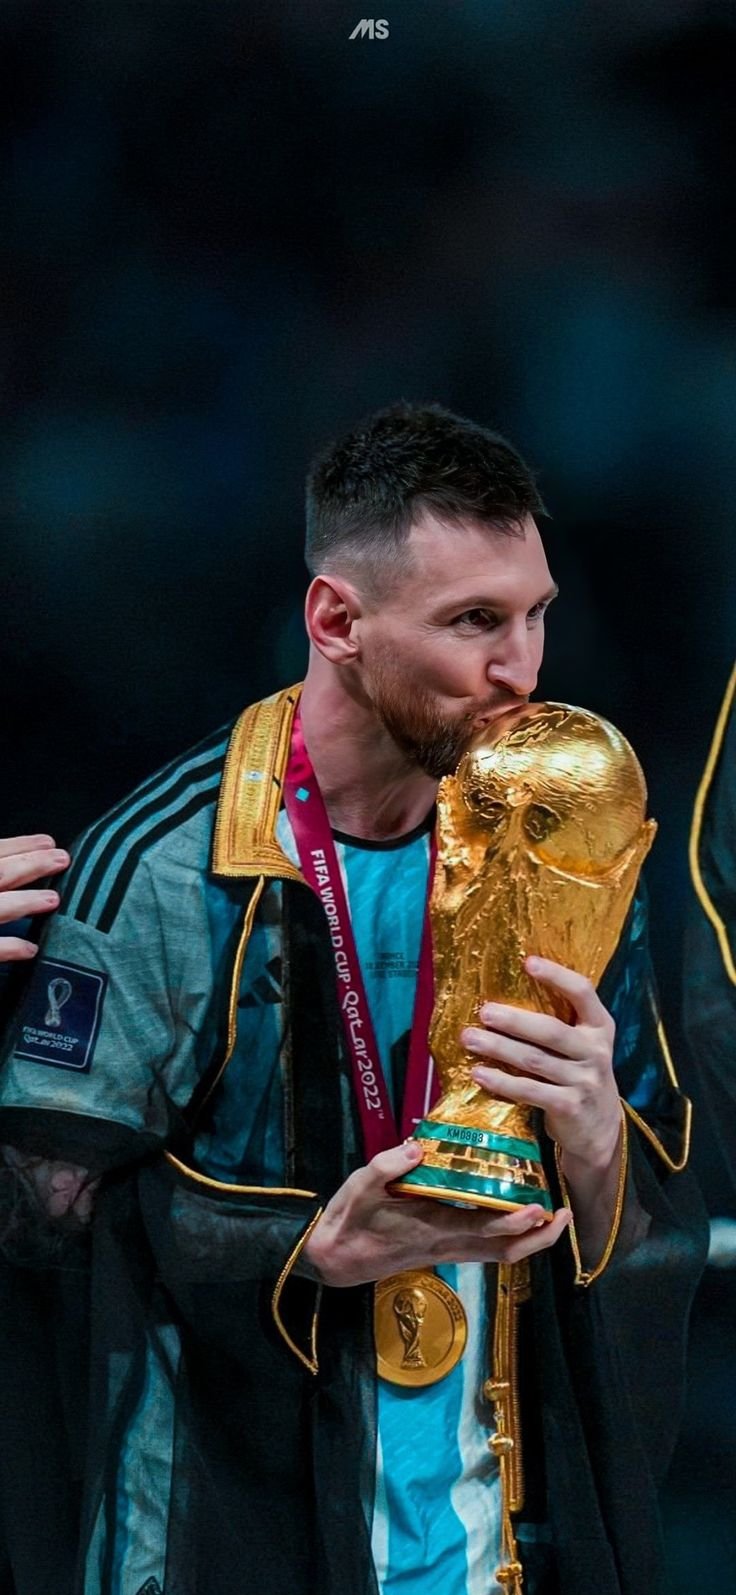 Lionel Messi Biography: Career Journey, Personal Life and Net Worth